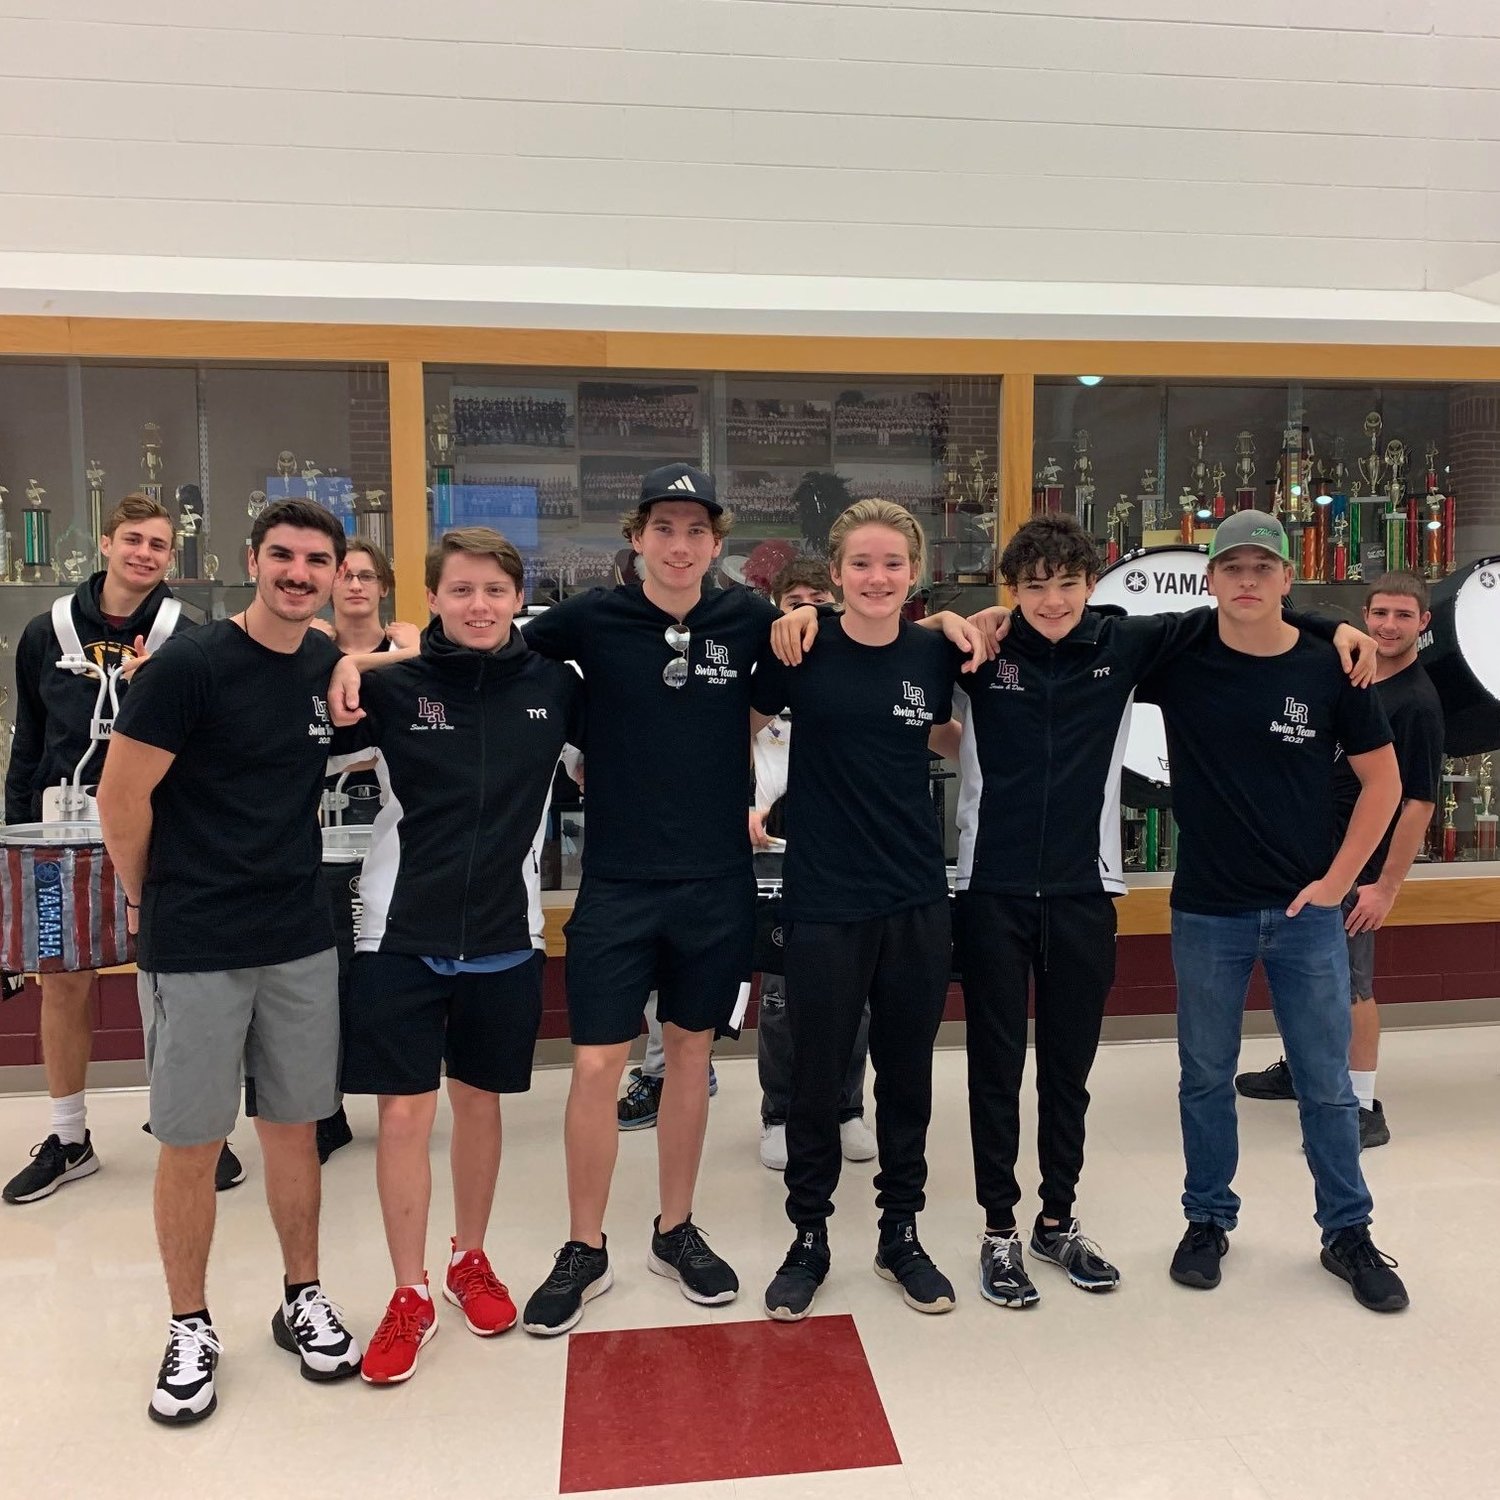 The Wildcats (pictured left to right), Brayden Eady, Owen Price, Caden Hendee, Brogan Homburg, Rowen Homburg and Corbett Wilson were given a send off by the high school on Wednesday, Nov. 10. Being cheered on by students, the team received an escort through the halls by the Rogersville High School drum line.